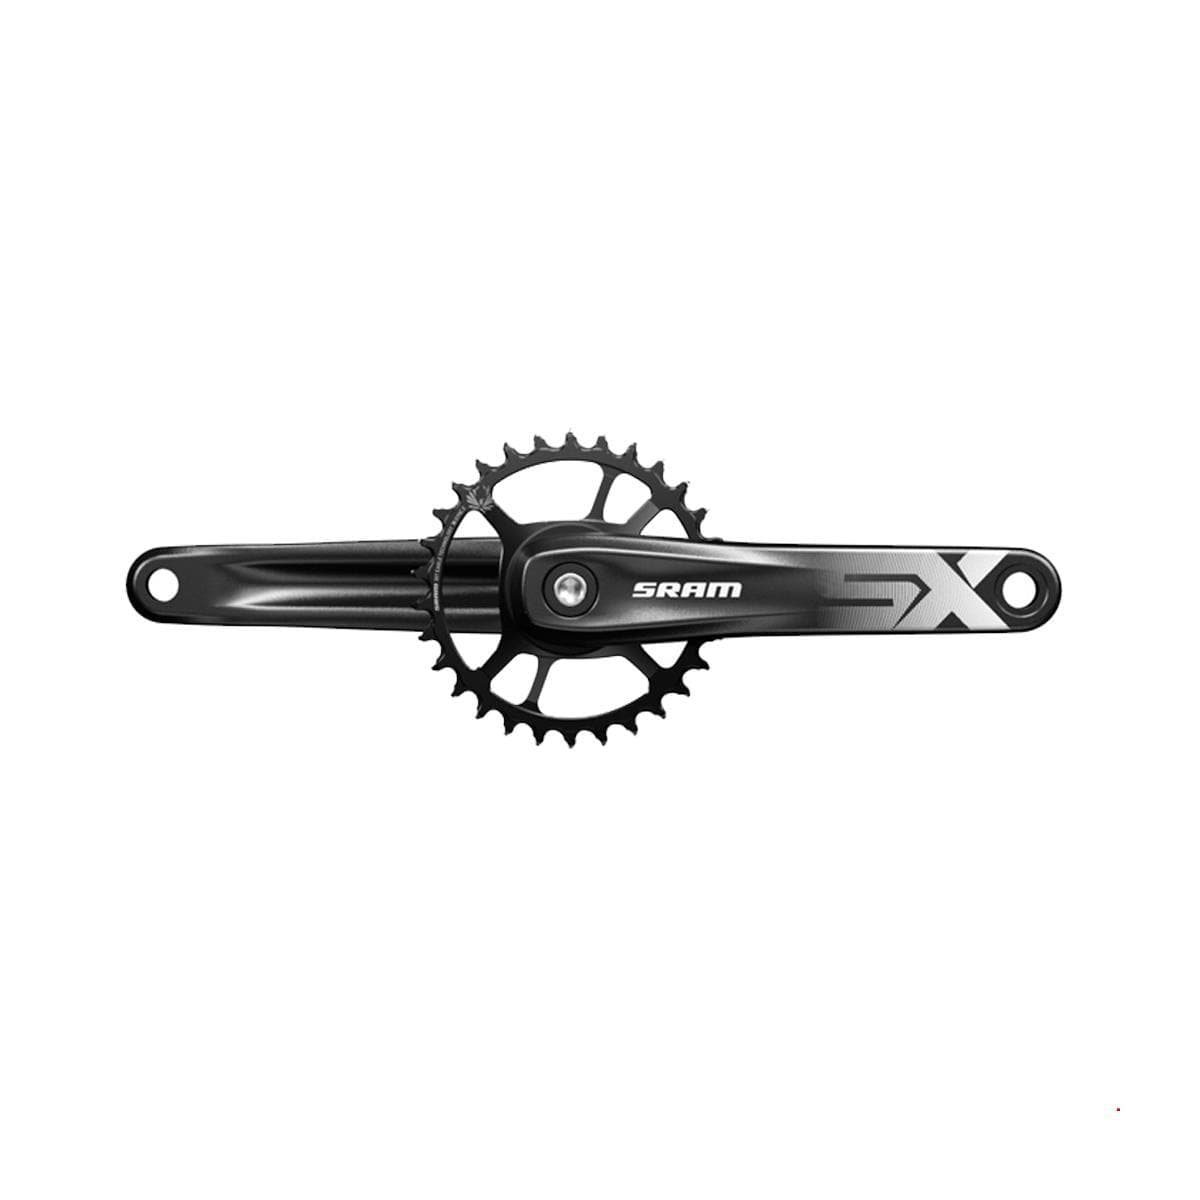 Sram Crankset Sx Eagle Boost 148 Powerspline 12S With Direct Mount 32T X-Sync 2 Steel Chainring A1: Black 170Mm